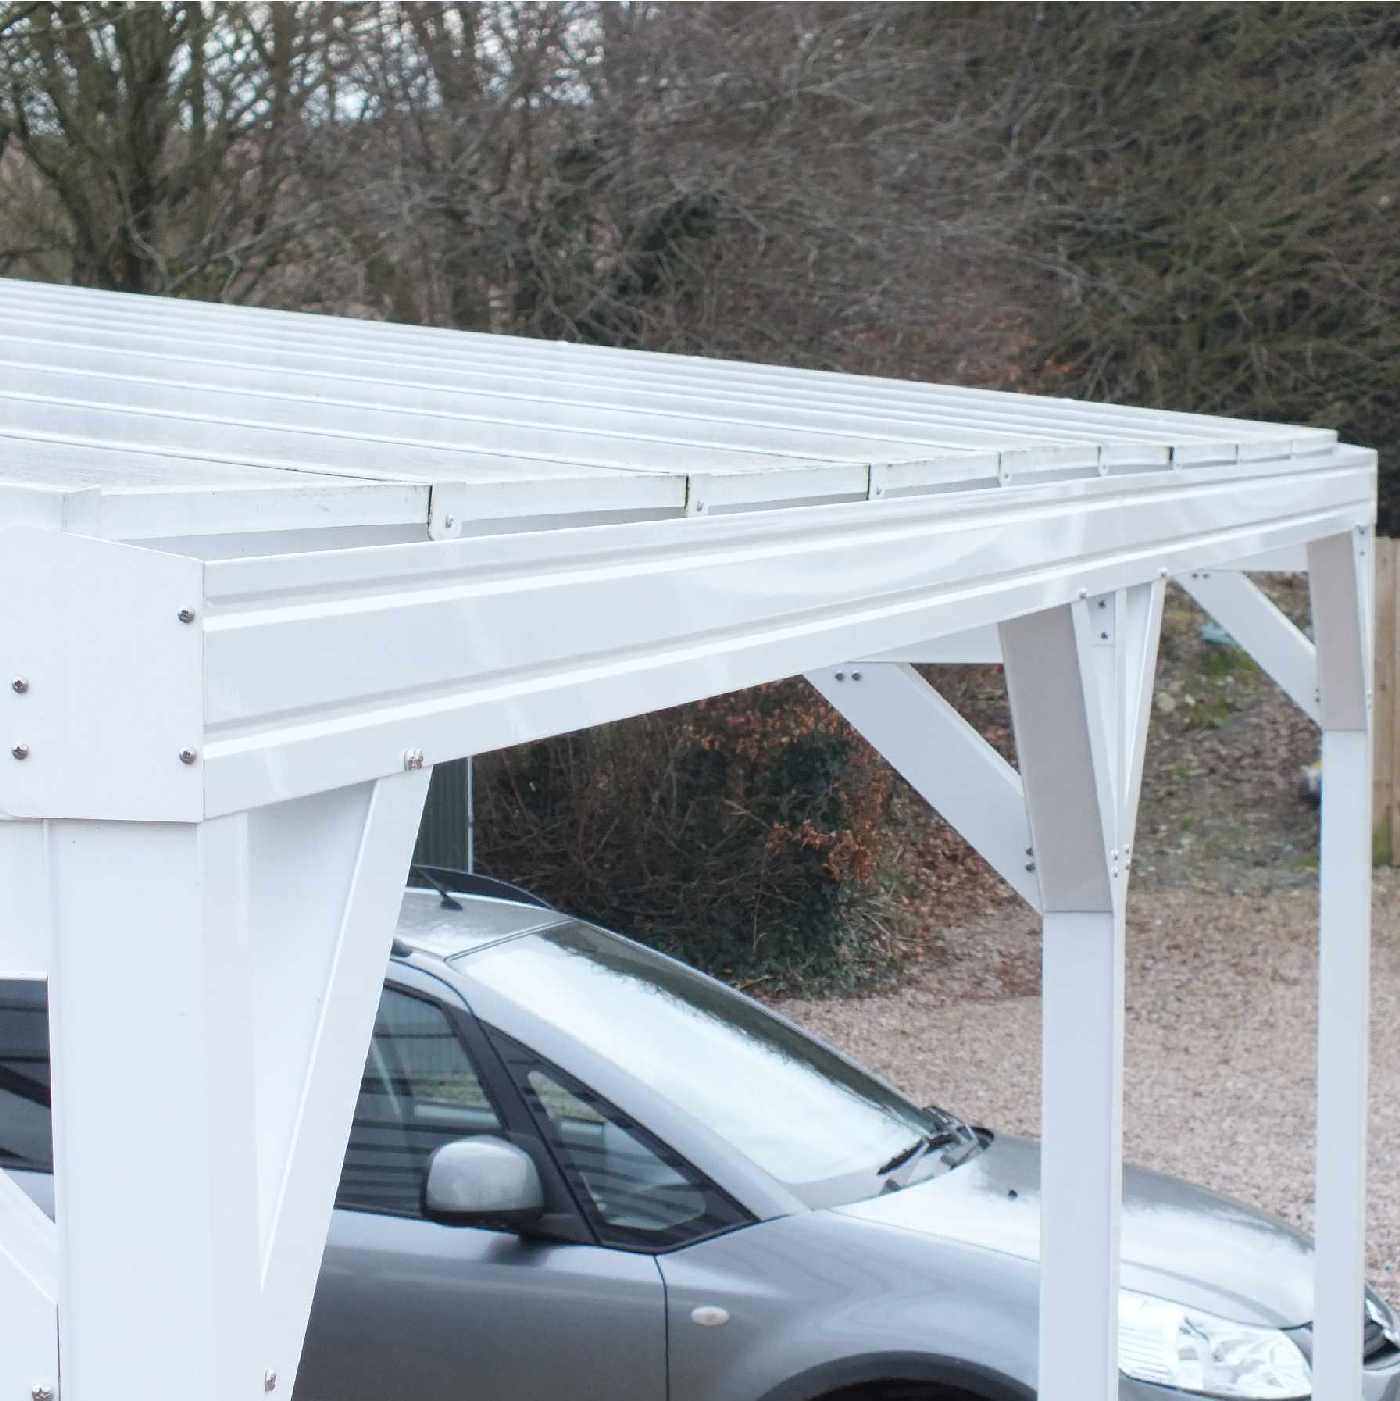 Omega Smart Free-Standing, White MonoPitch Roof Canopy with 16mm Polycarbonate Glazing - 3.1m (W) x 2.0m (P), (4) Supporting Posts from Omega Build